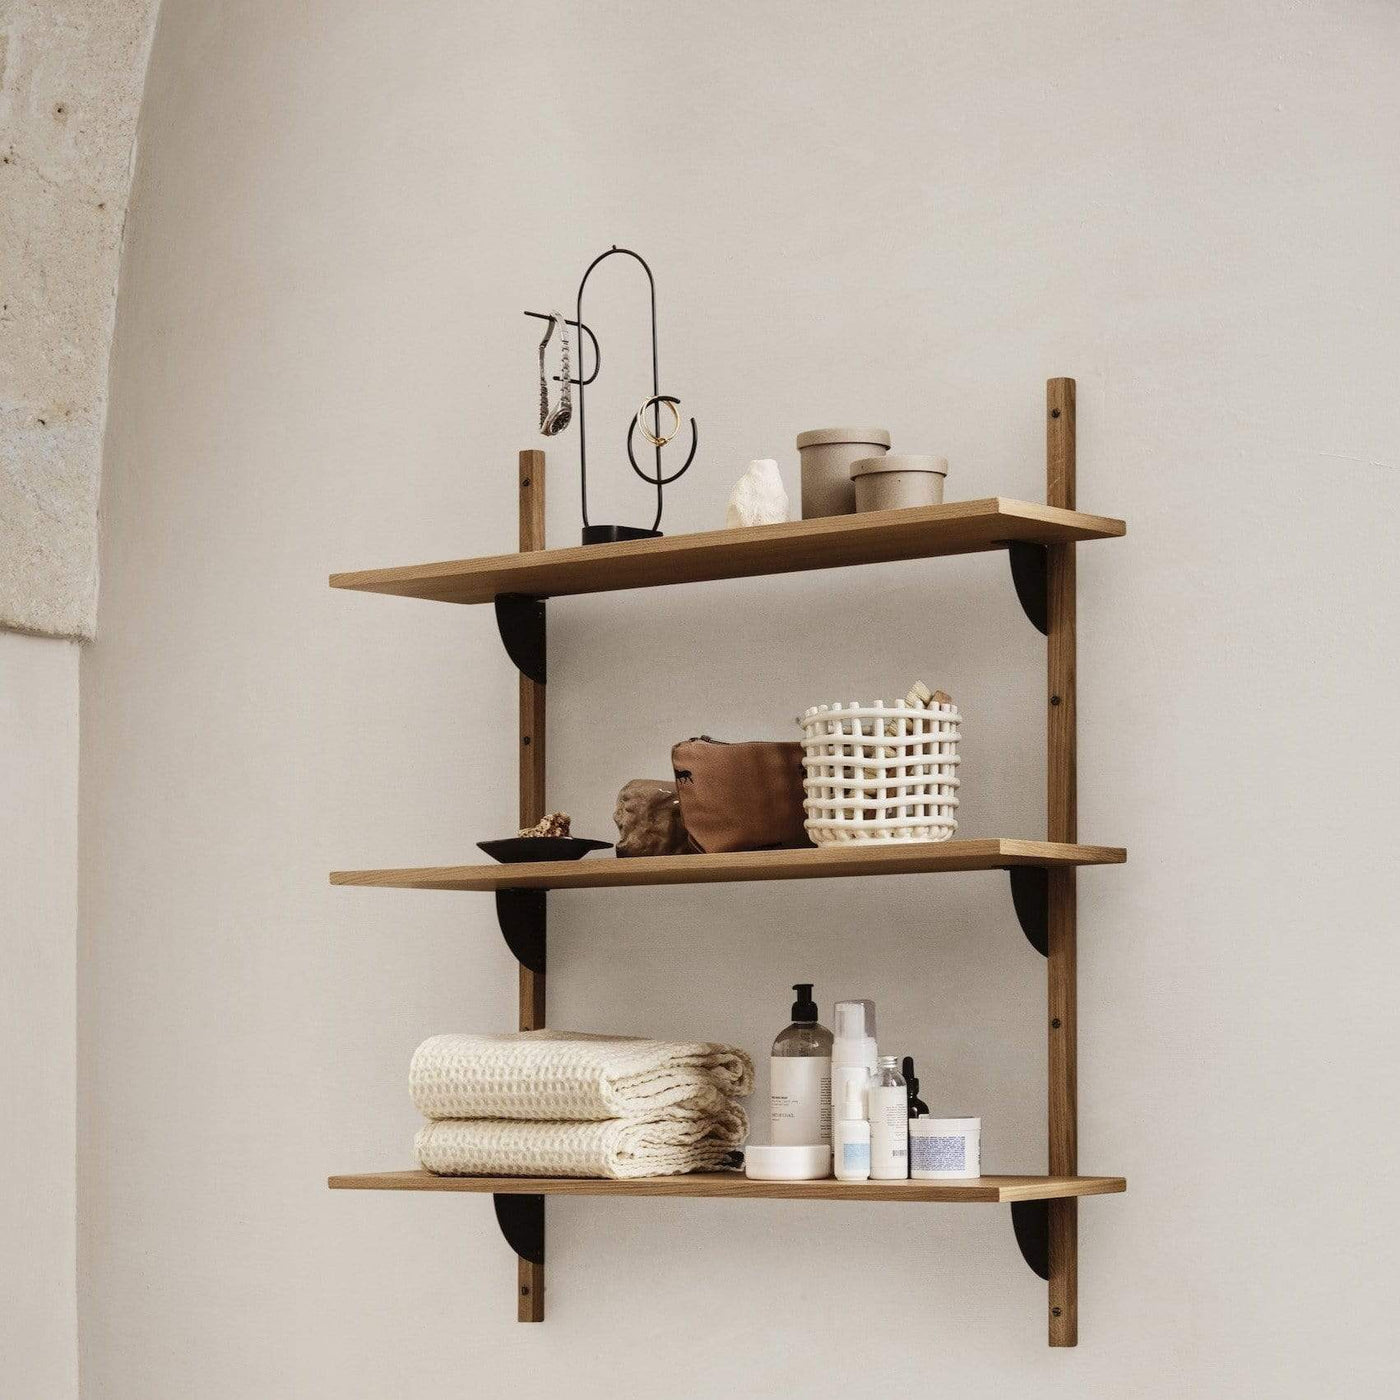 Ferm Living Sector shelf triple wide shelf. Available from someday designs